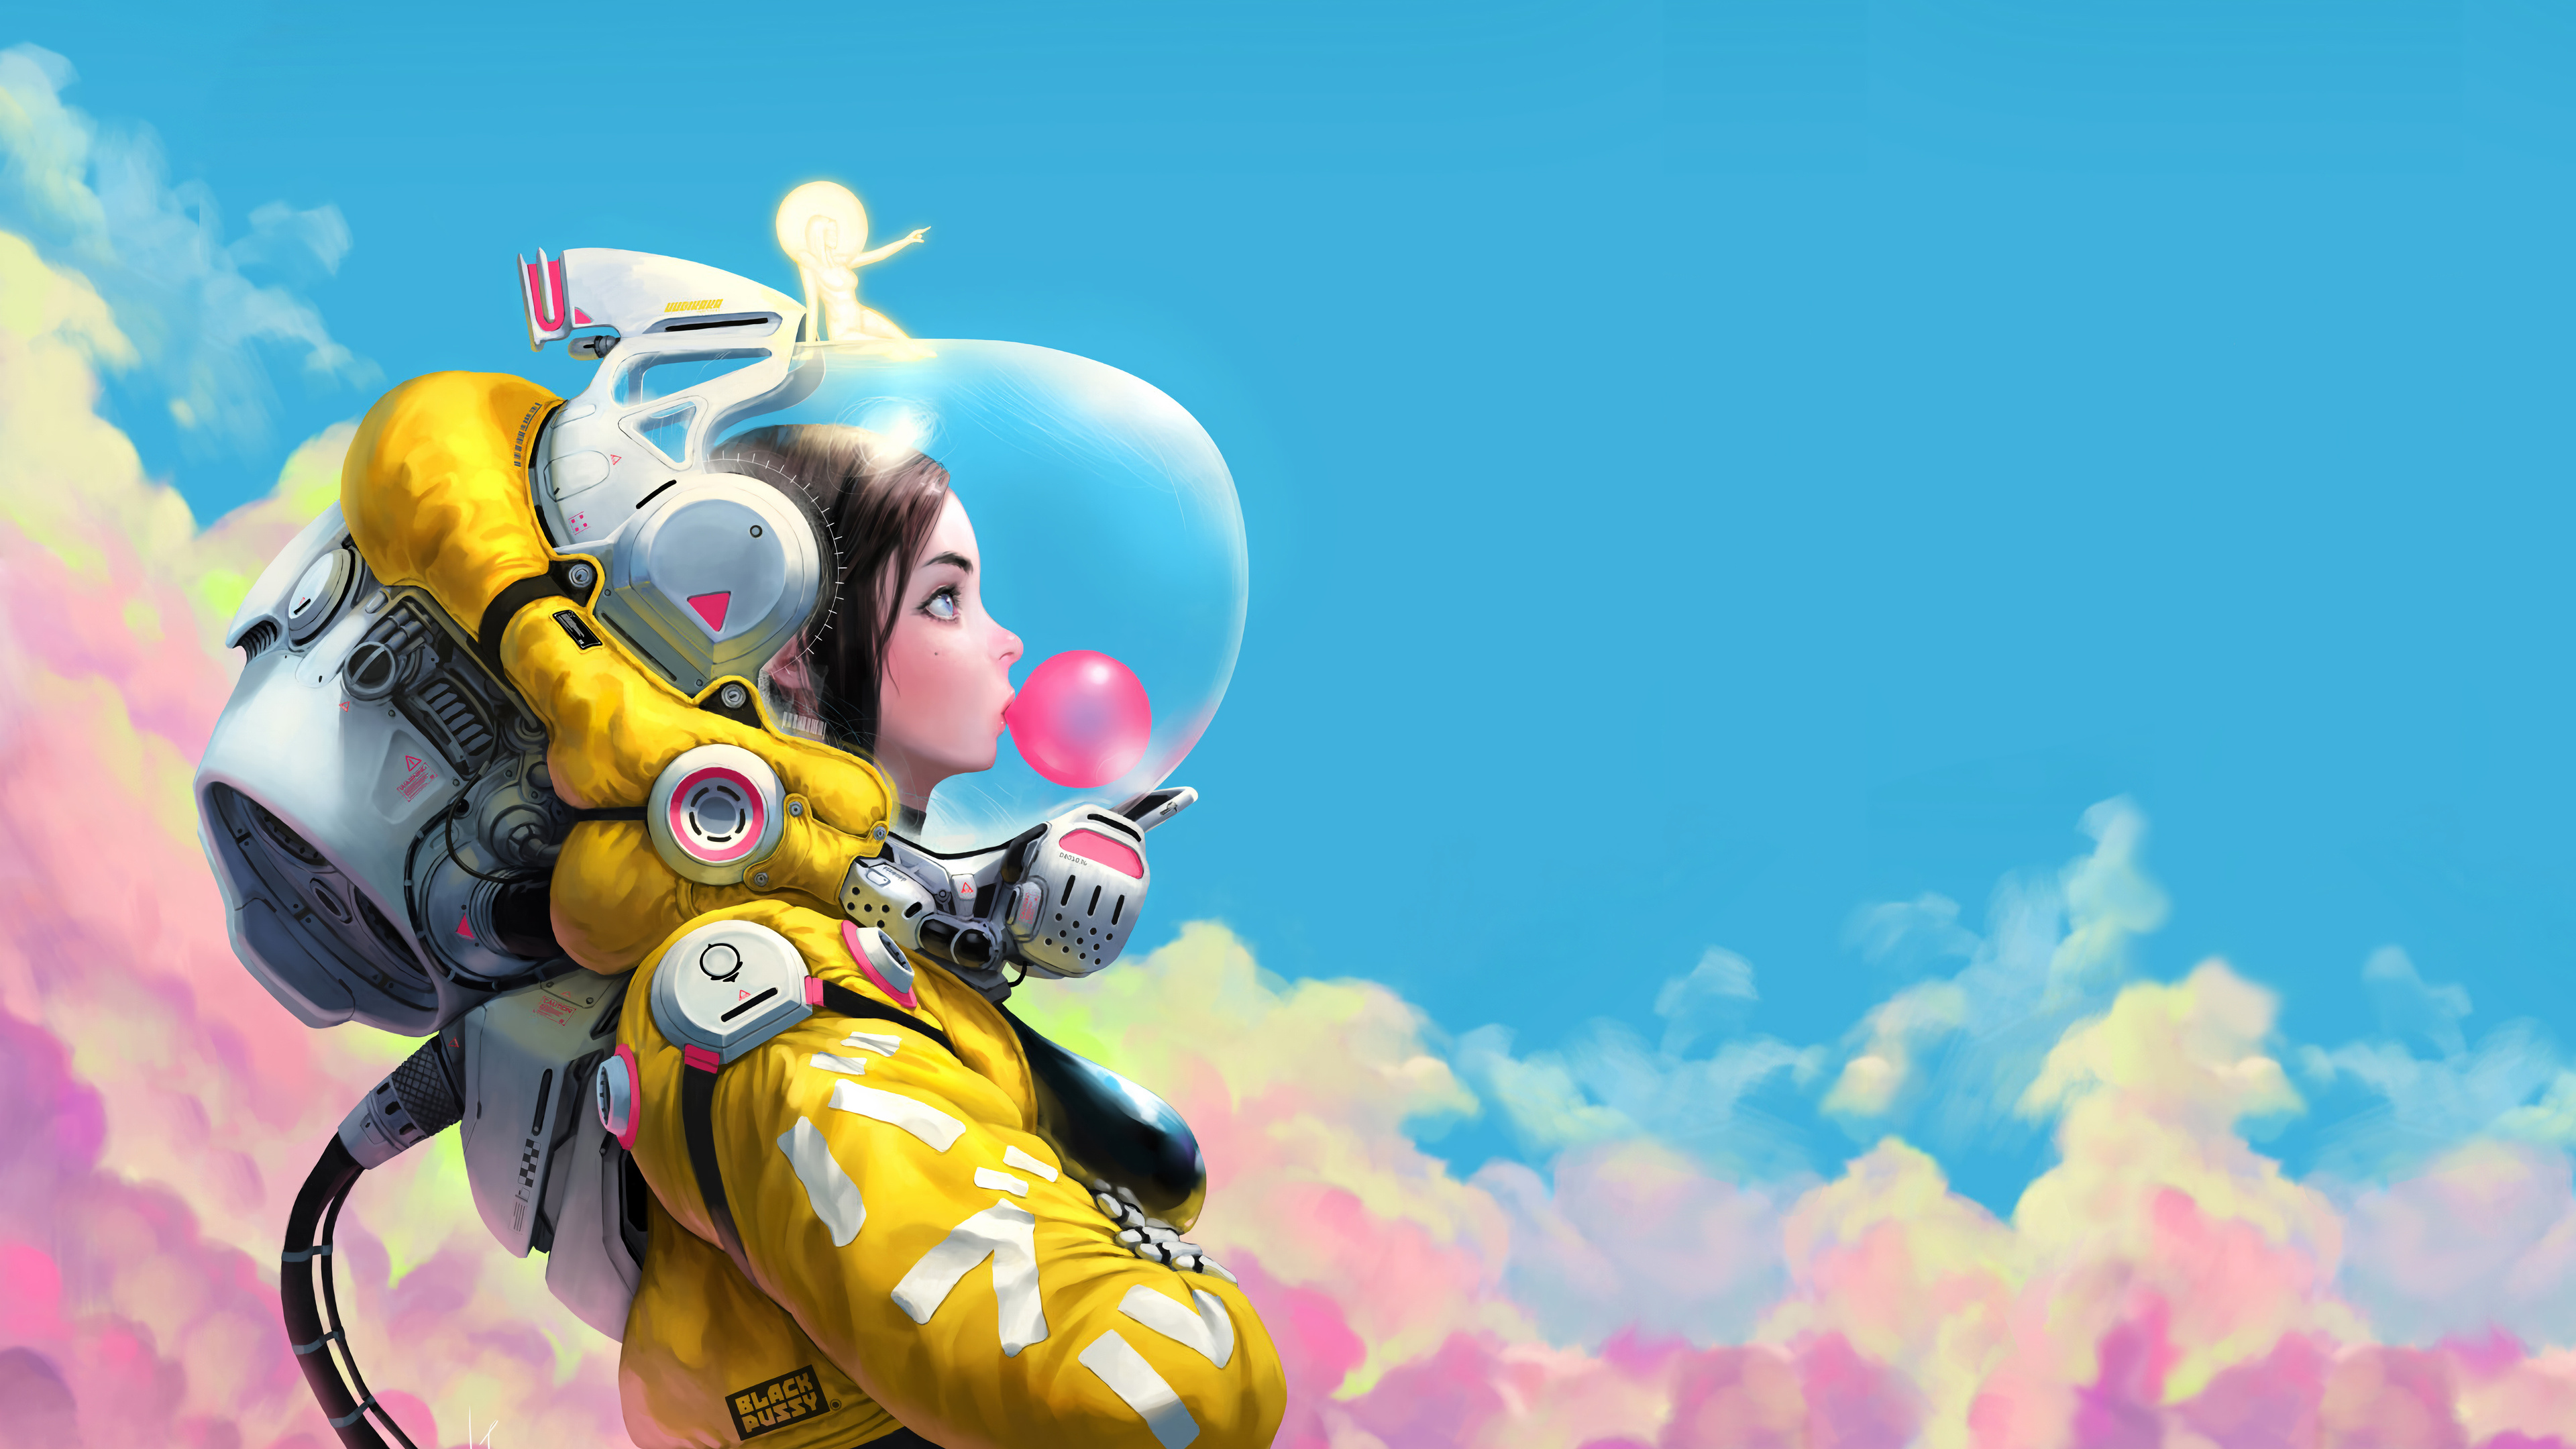 Bubble gum in space, Futuristic and whimsical, Cute and colorful, Galactic bubble-blowing, 3840x2160 4K Desktop